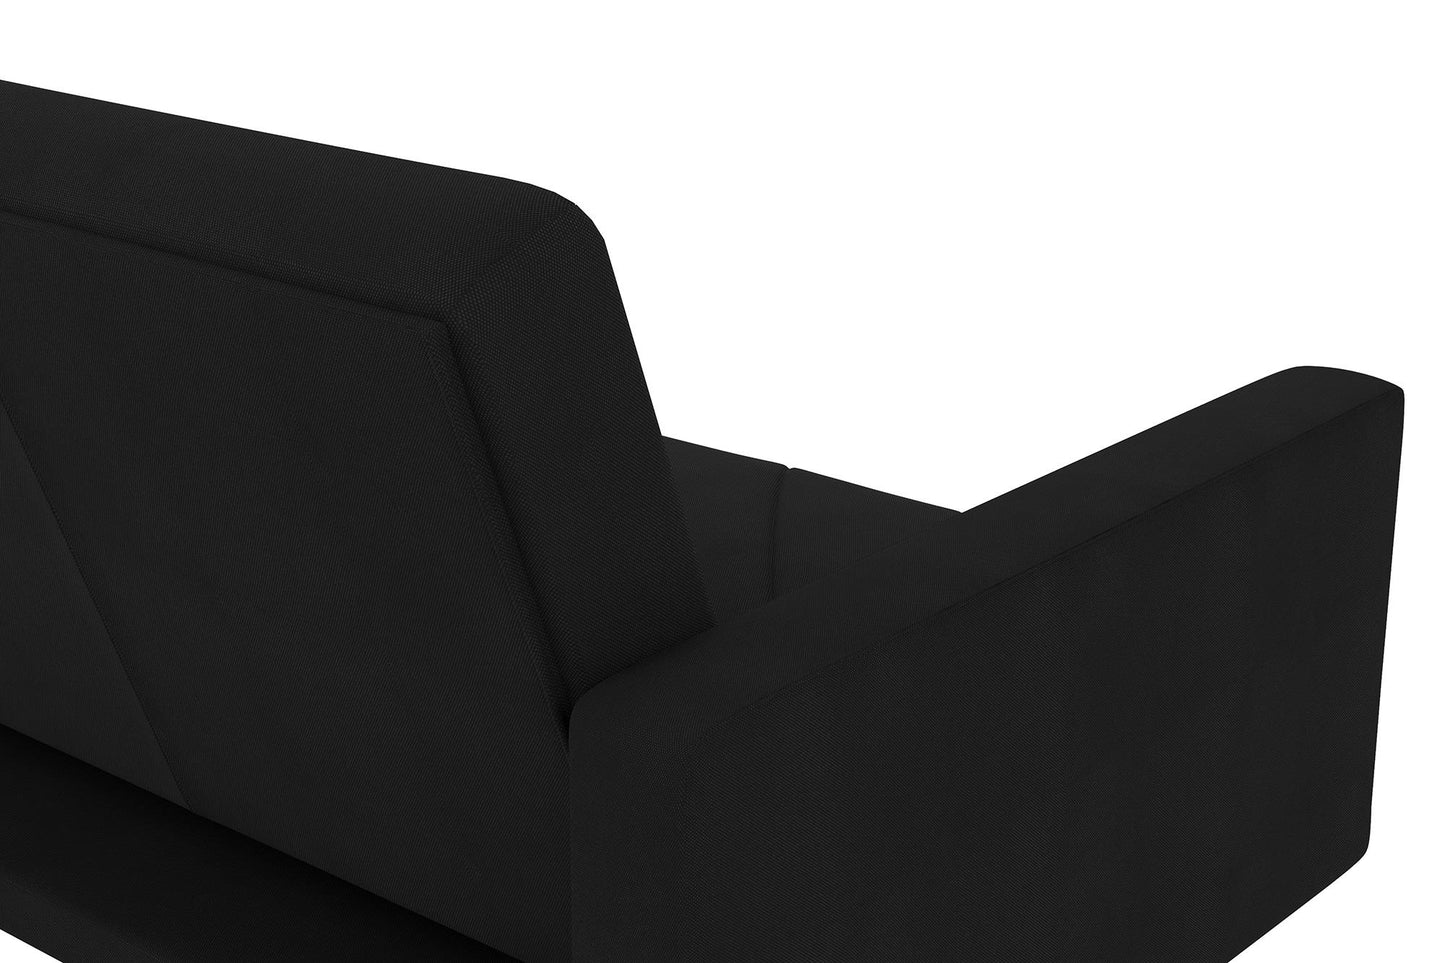 Paxson Futon with Solid Wood Legs and Diagonal Design - Black